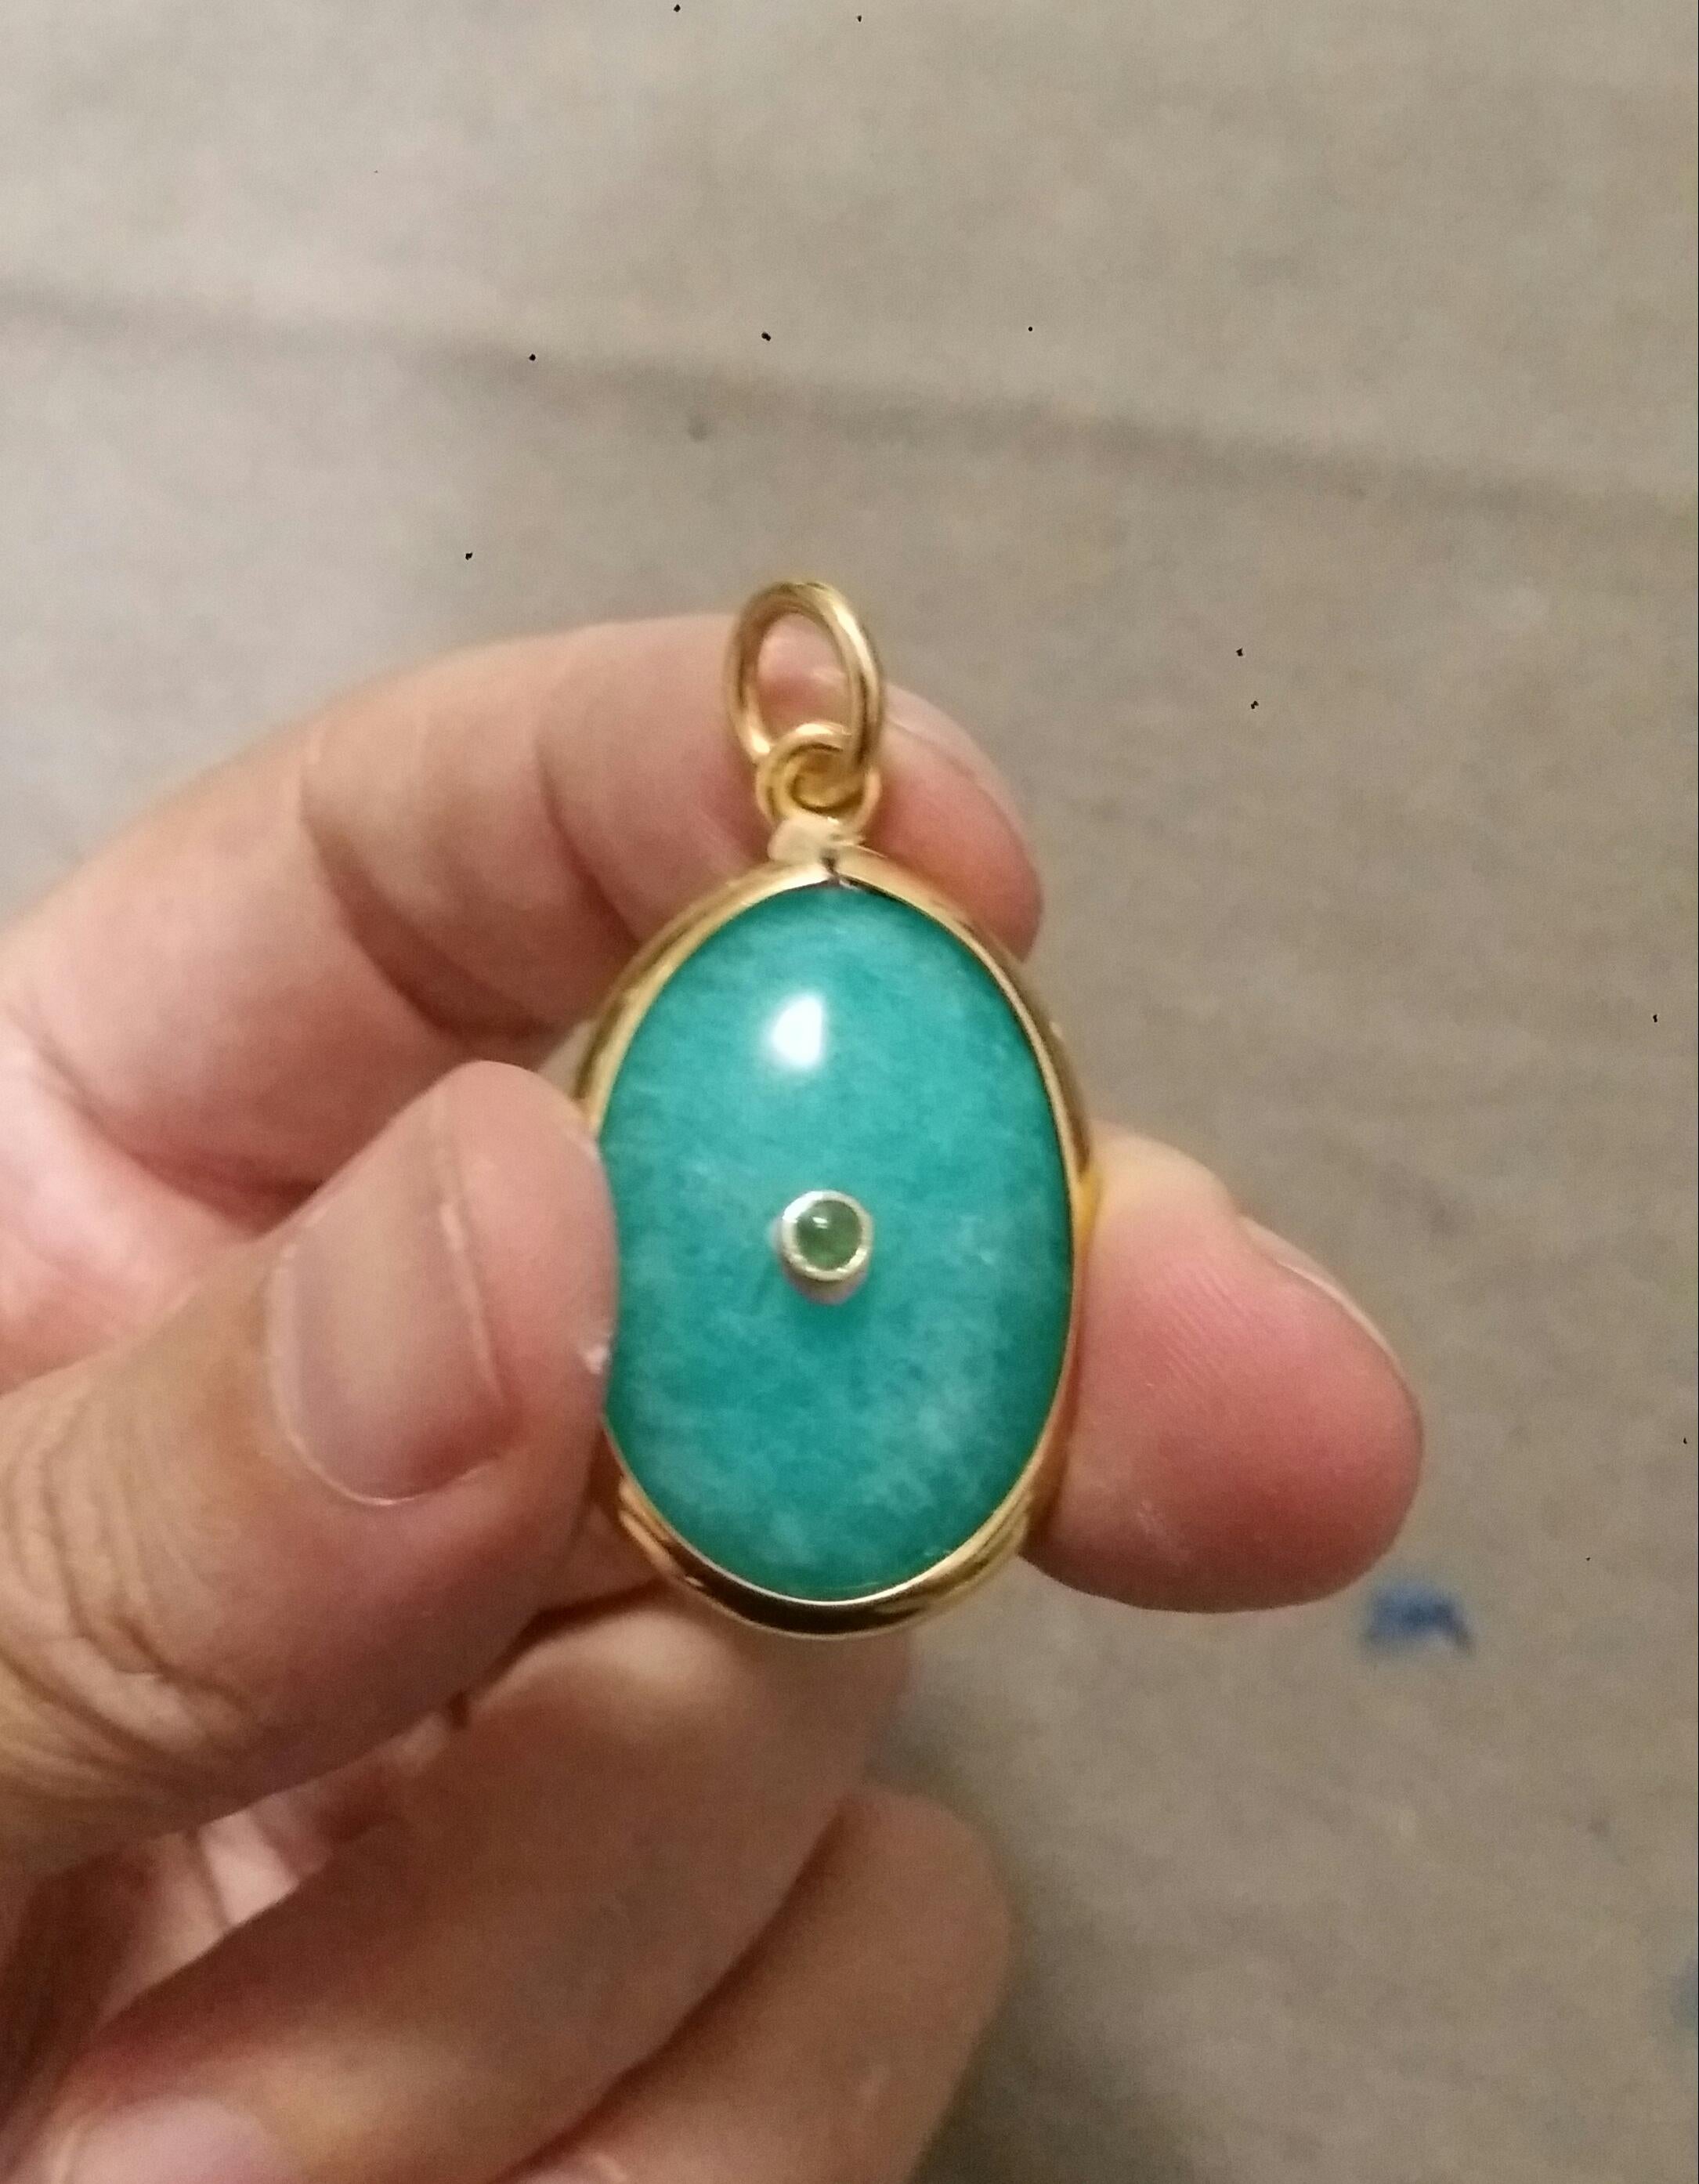 33 Carats Oval Amazonite Cabochon measuring 20x30 mm set as a Pendant in 14kt yellow gold bezel with in the center a small round Emerald Cab set  in 14K yellow gold bezel .